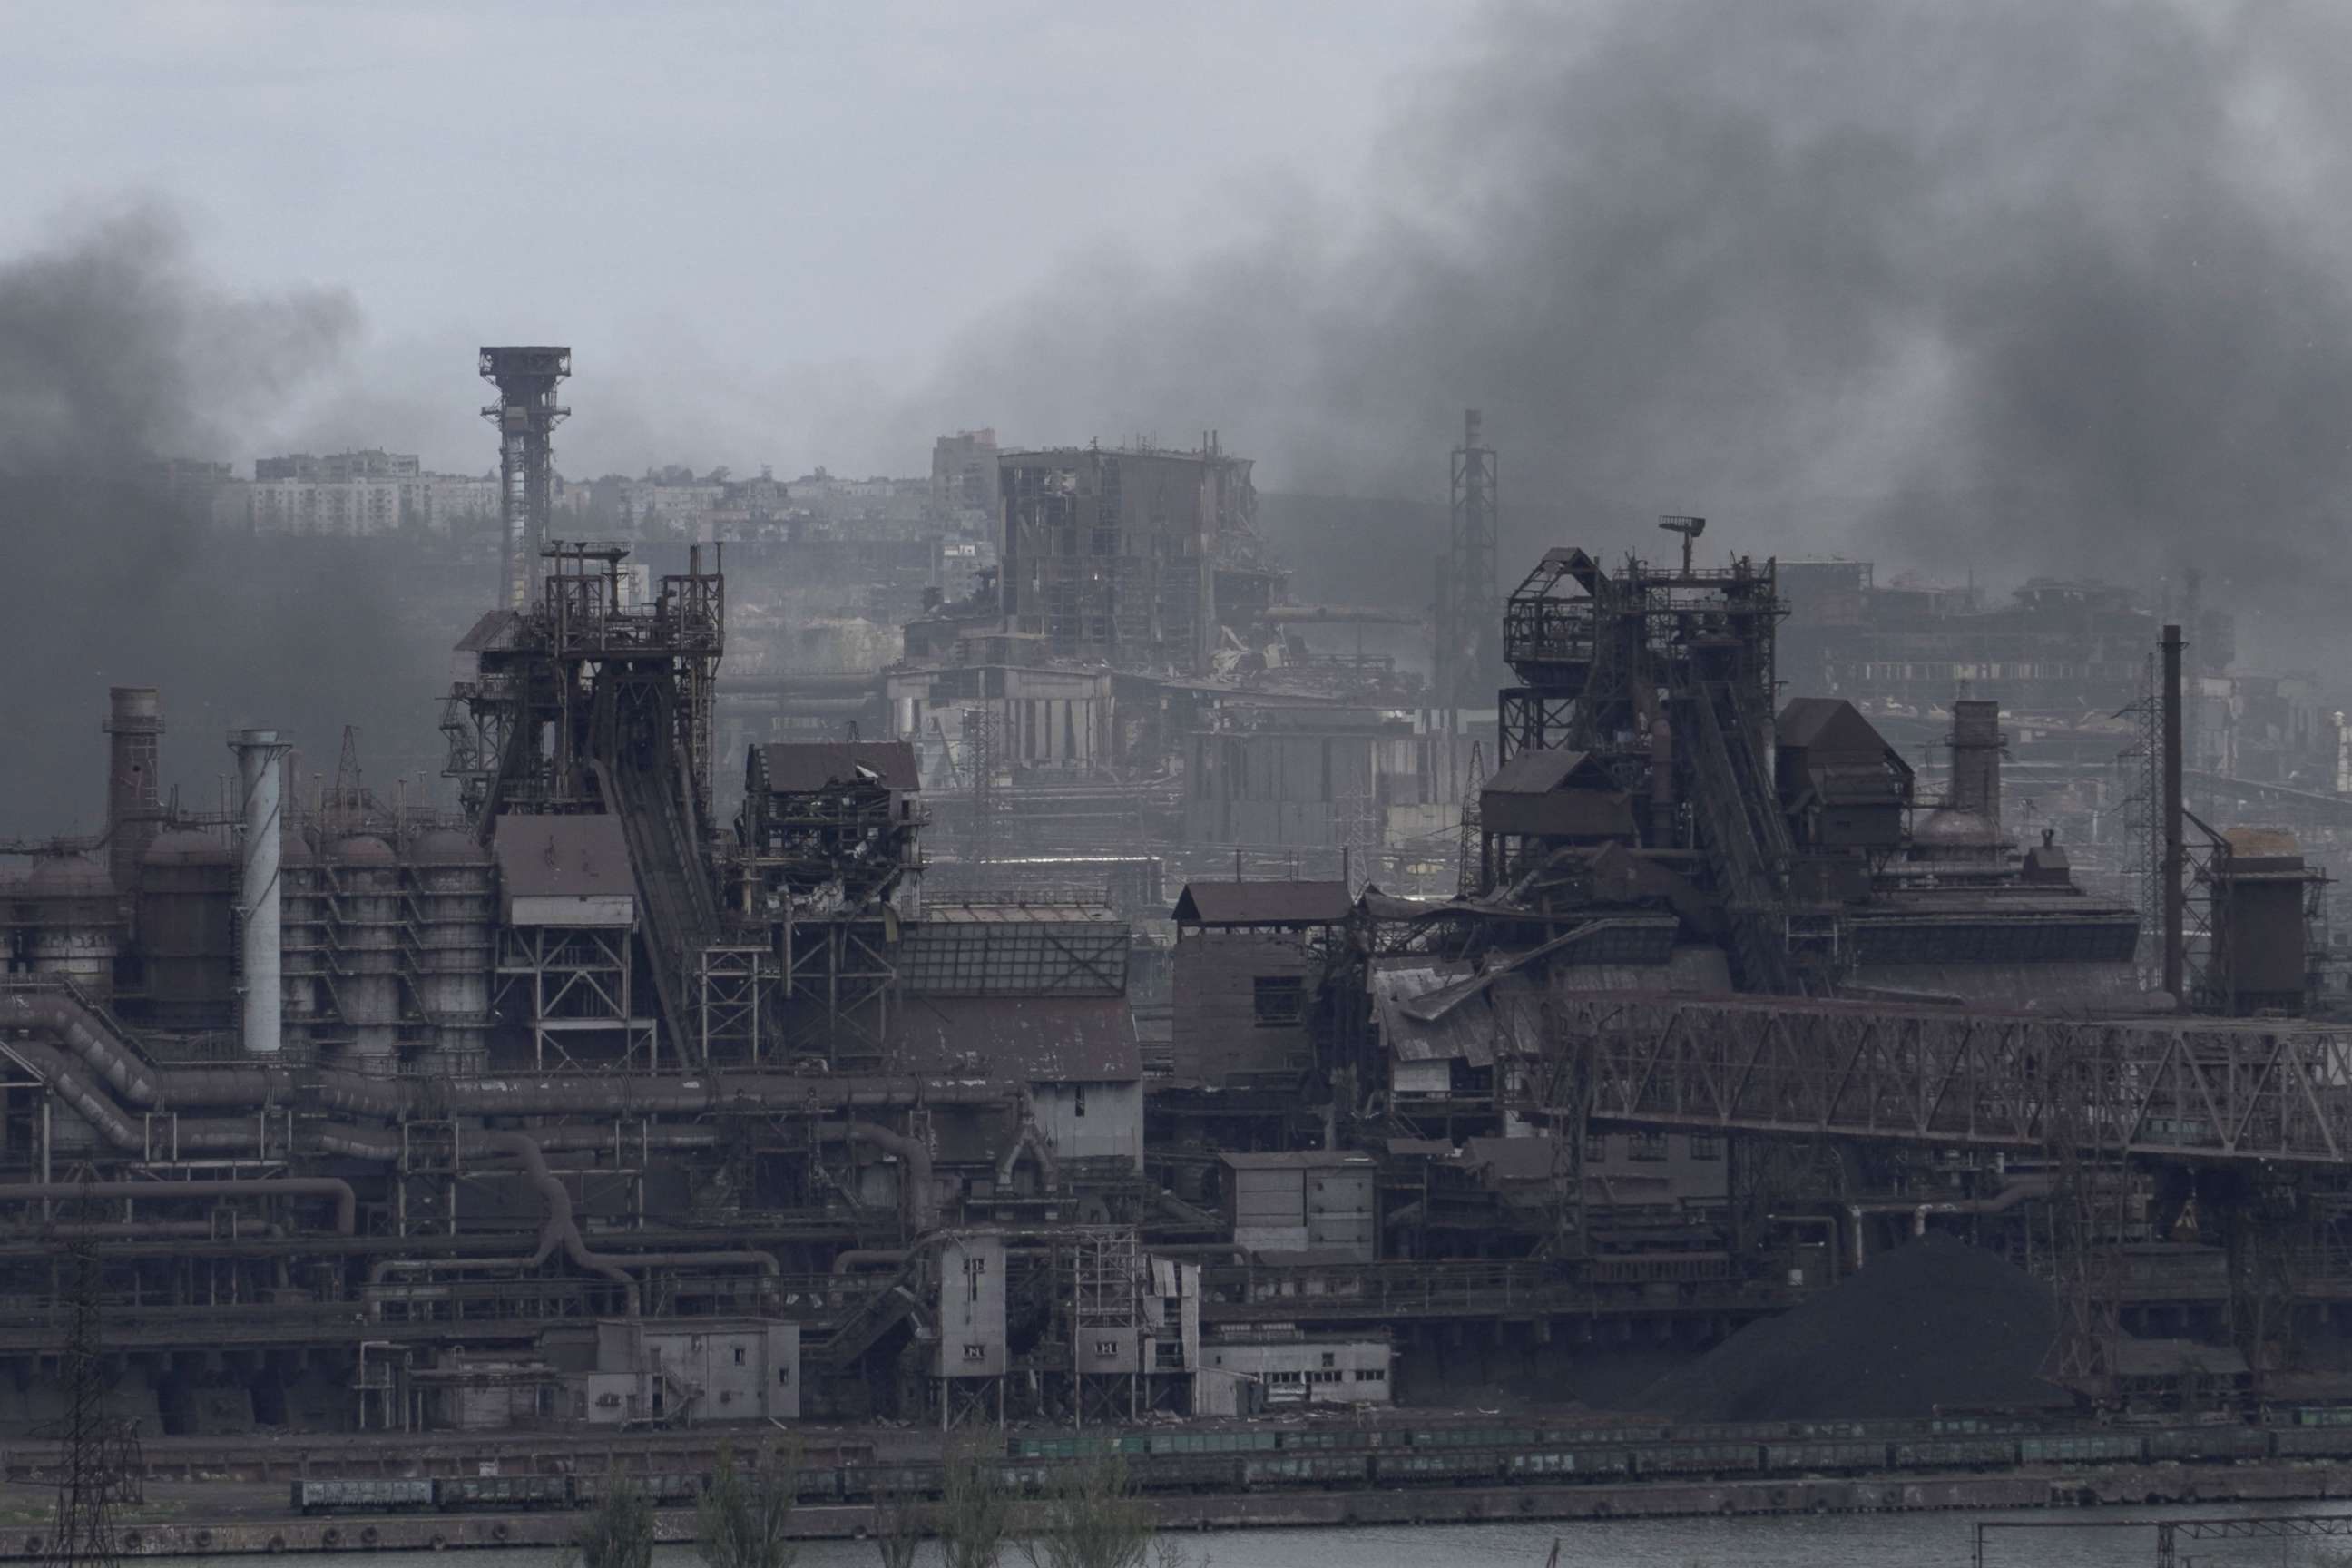 PHOTO: A view shows the Azovstal steel plant in the city of Mariupol, Ukraine, on May 10, 2022, amid the ongoing Russian military action.